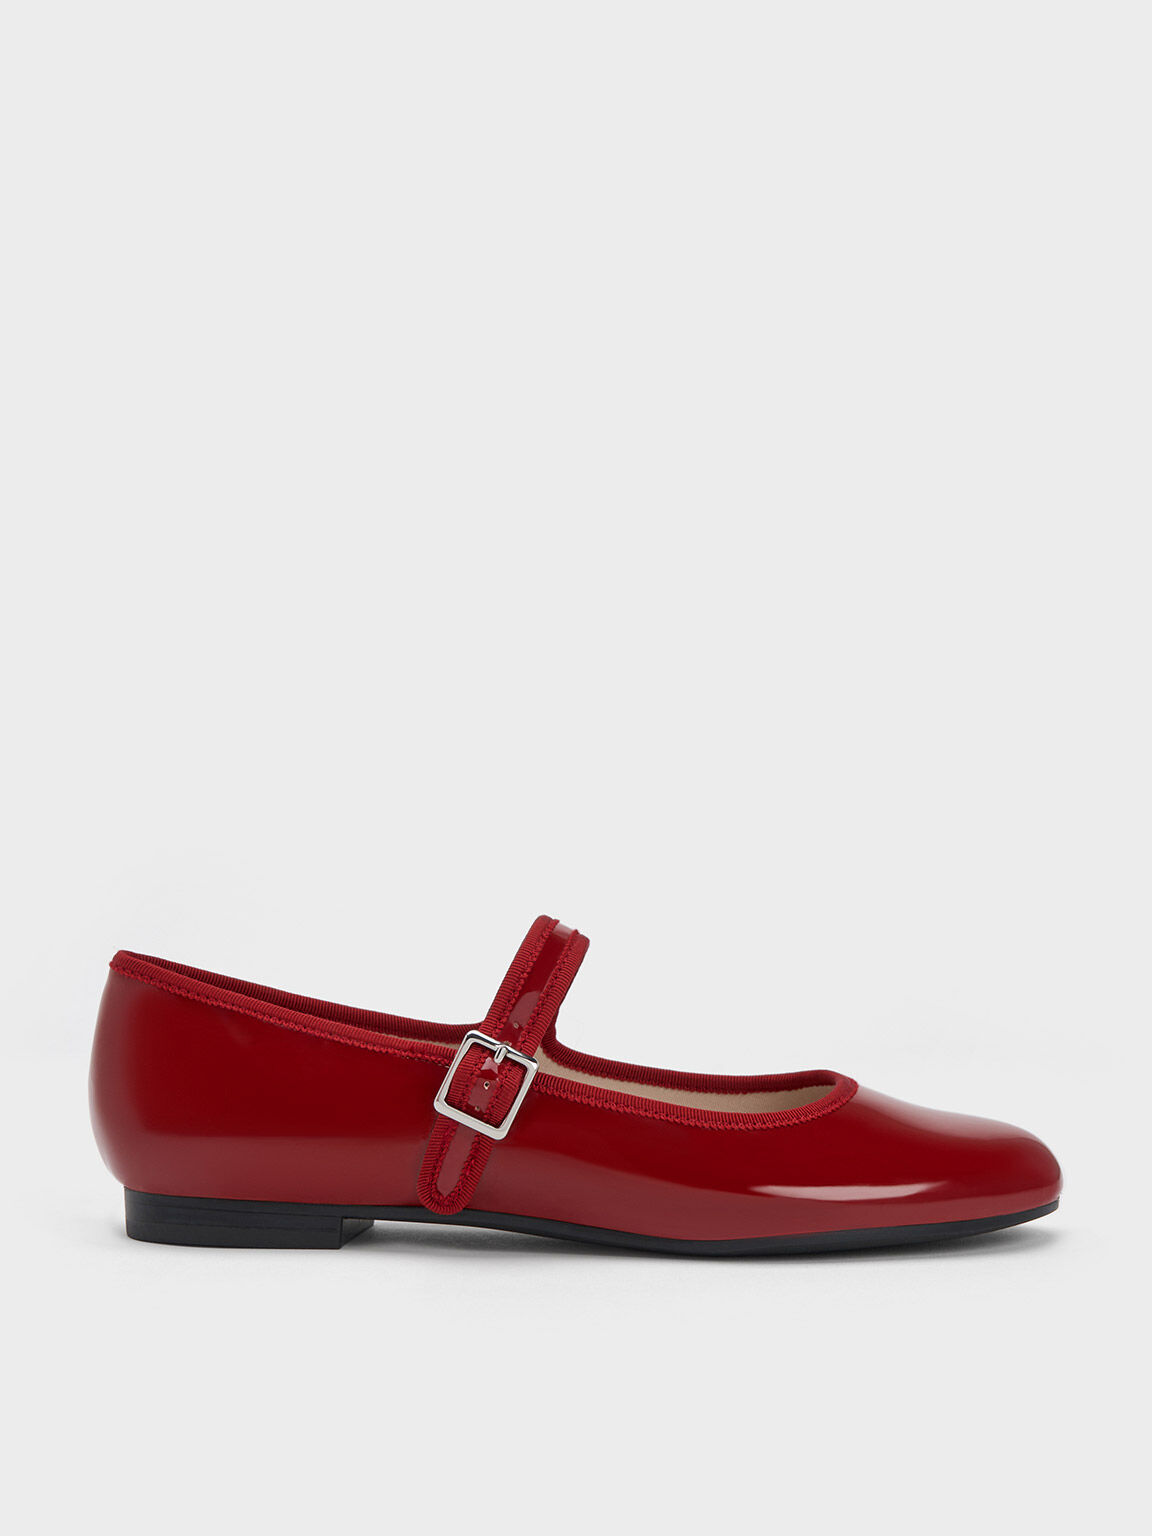 Sepatu Flats Patent Buckled Mary Jane, Red, hi-res